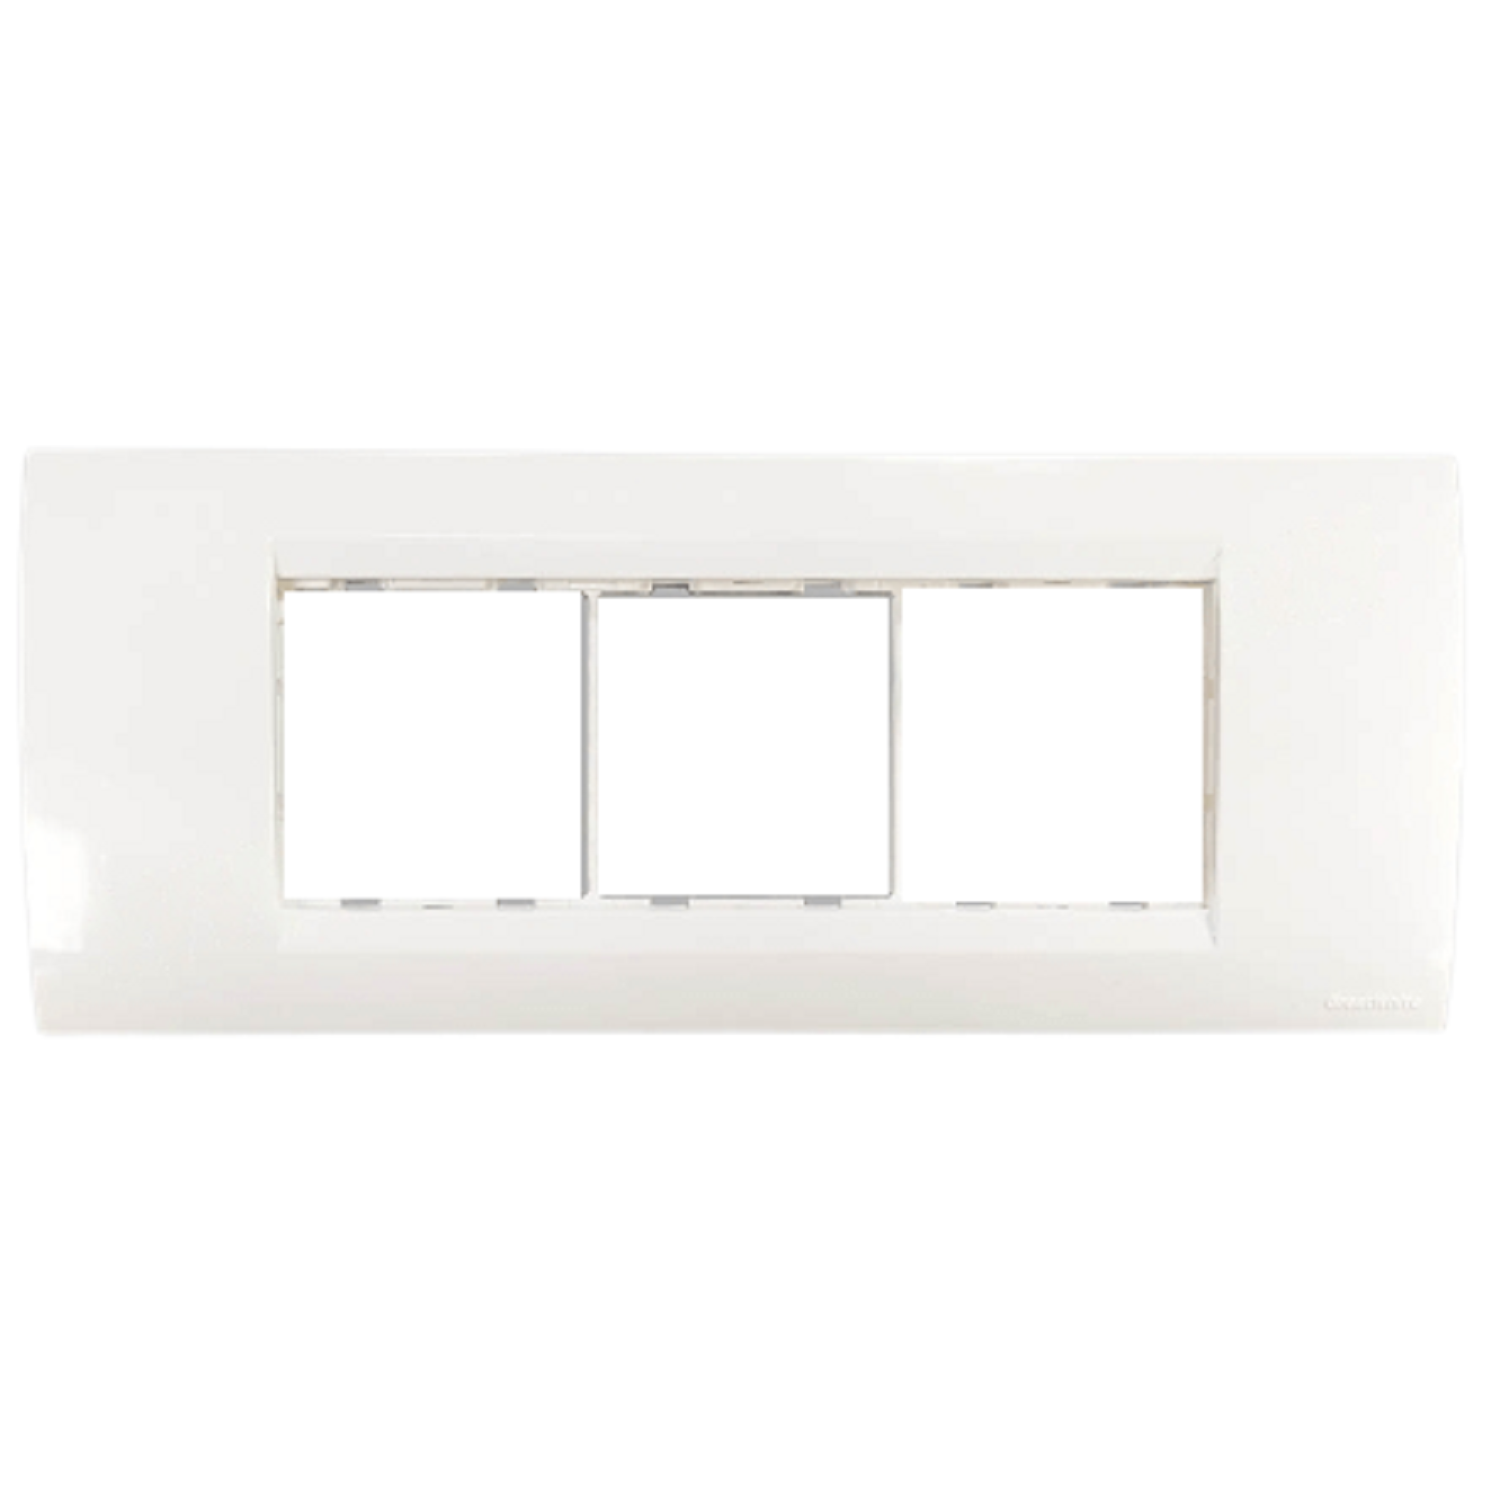 GreatWhite Fiana 6 Module Cover Plate with Base Frame - White